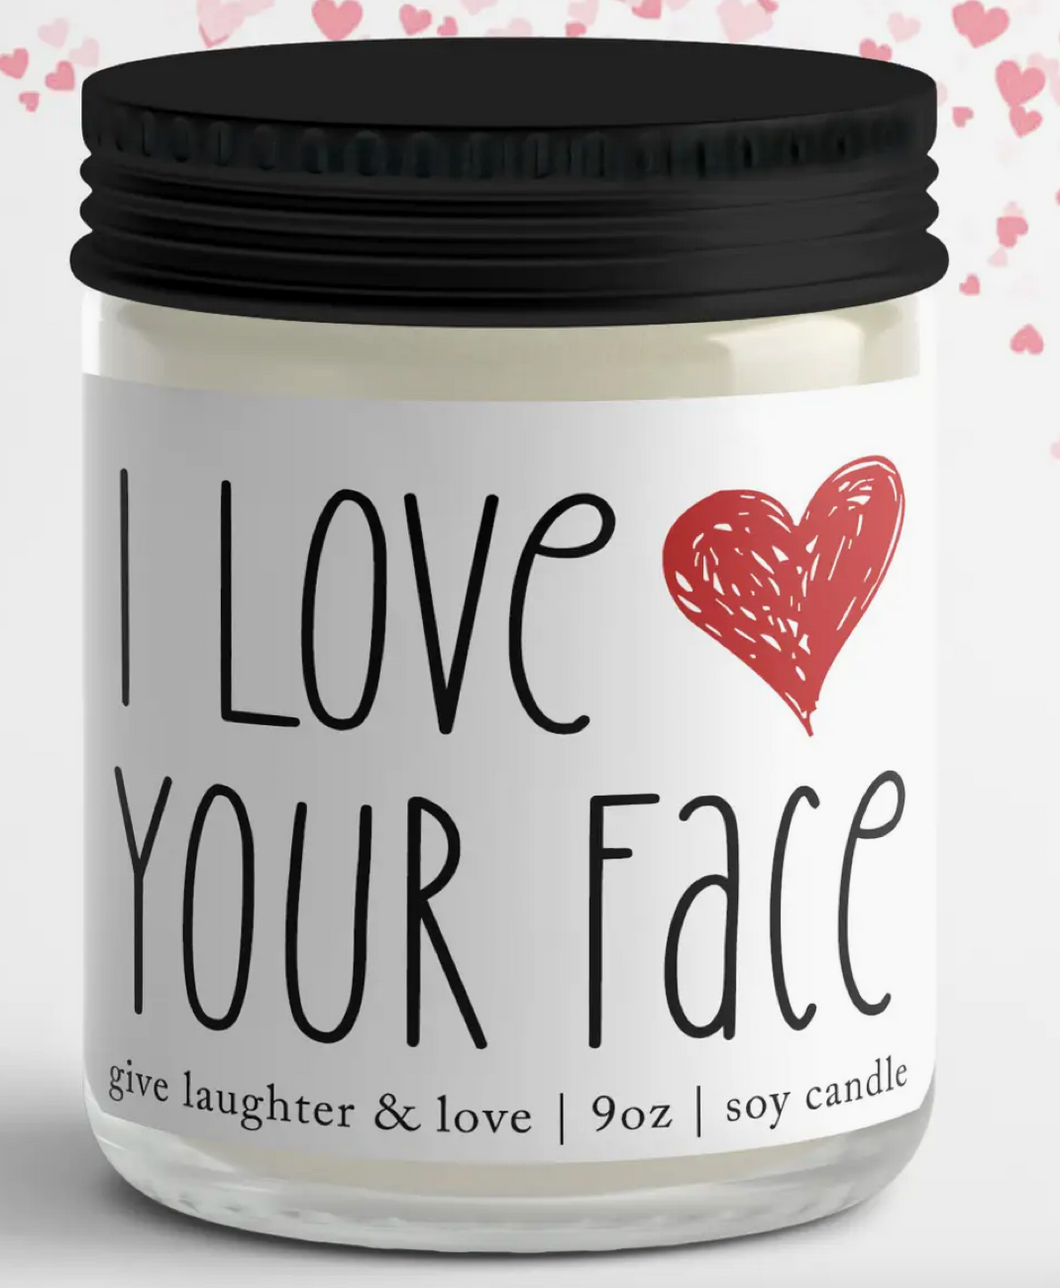 I Love Your Face Candle